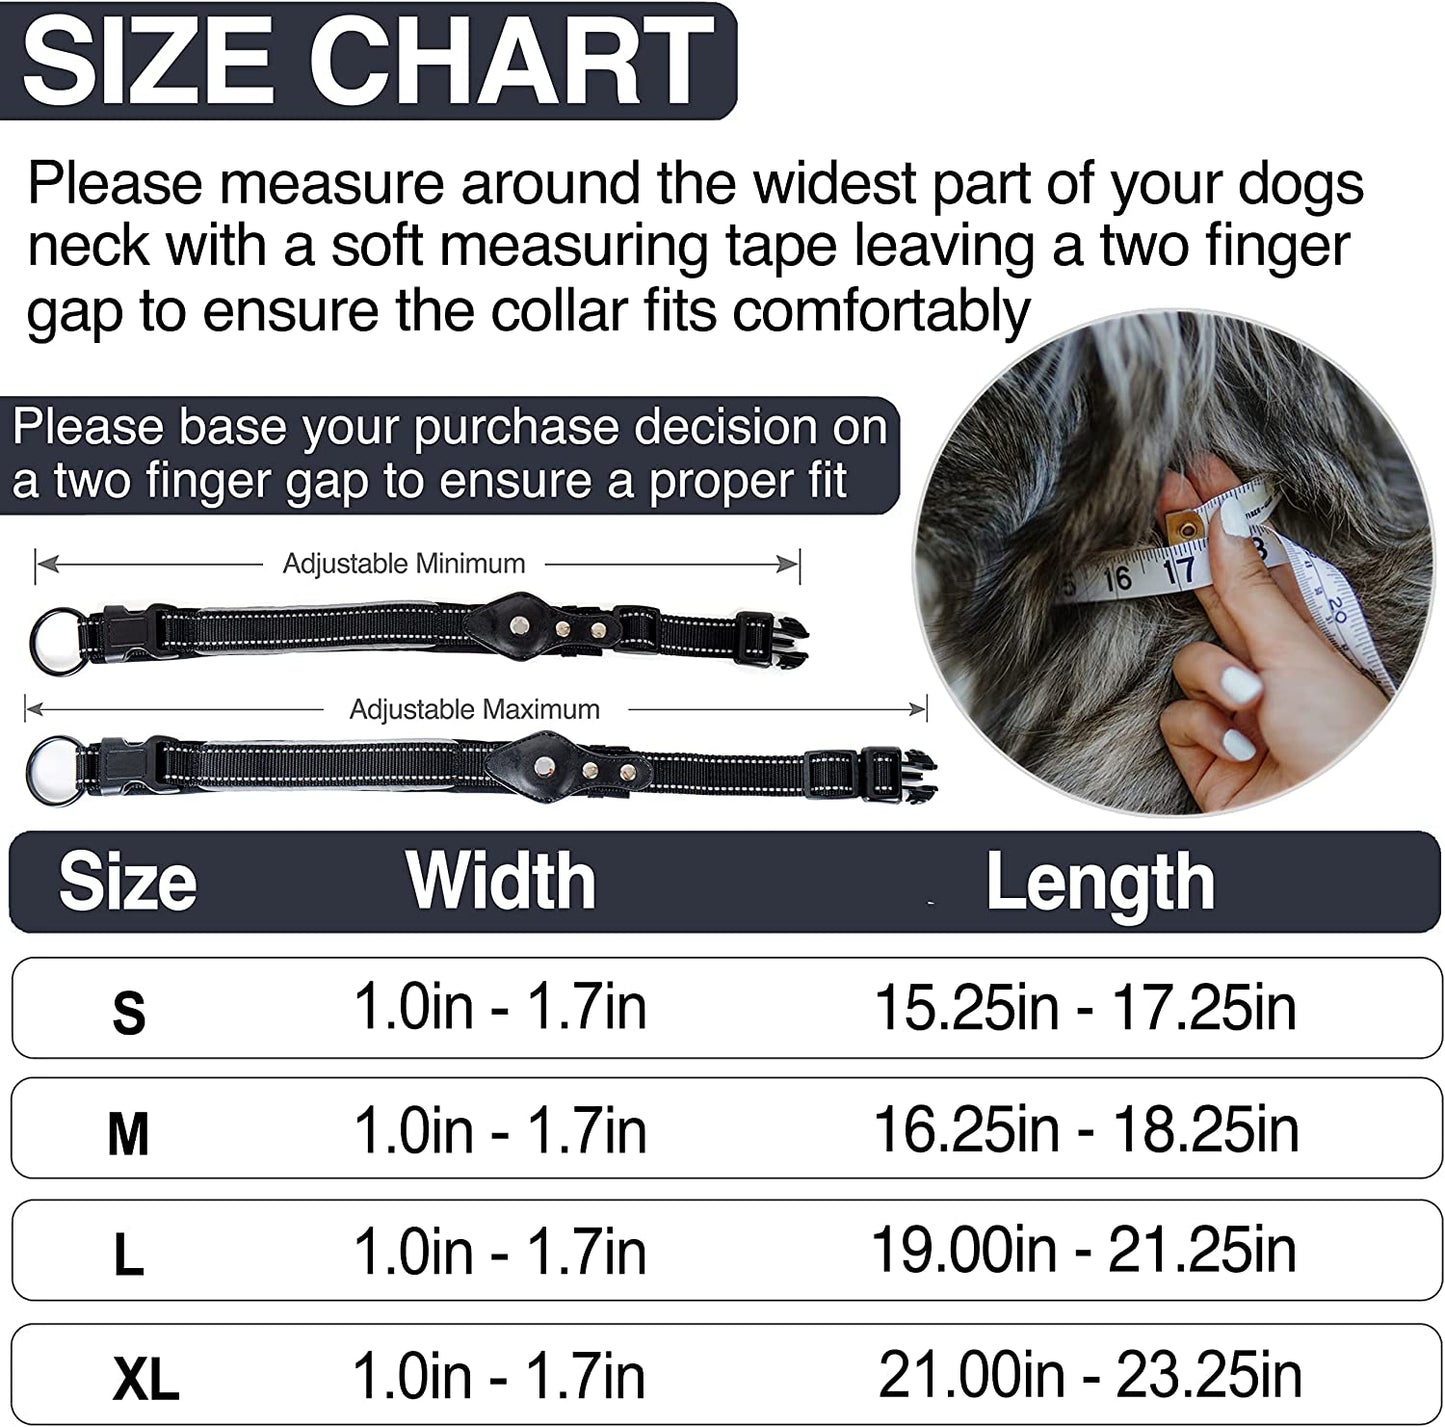 Safe Paws Reflective Airtag Dog Collar with Soft Neoprene - Our Durable Airtag Collar Holder Uses Heavy Duty Buttons to Secure Your Airtag - Air Tag Collars for Small Medium Large & XL Dogs